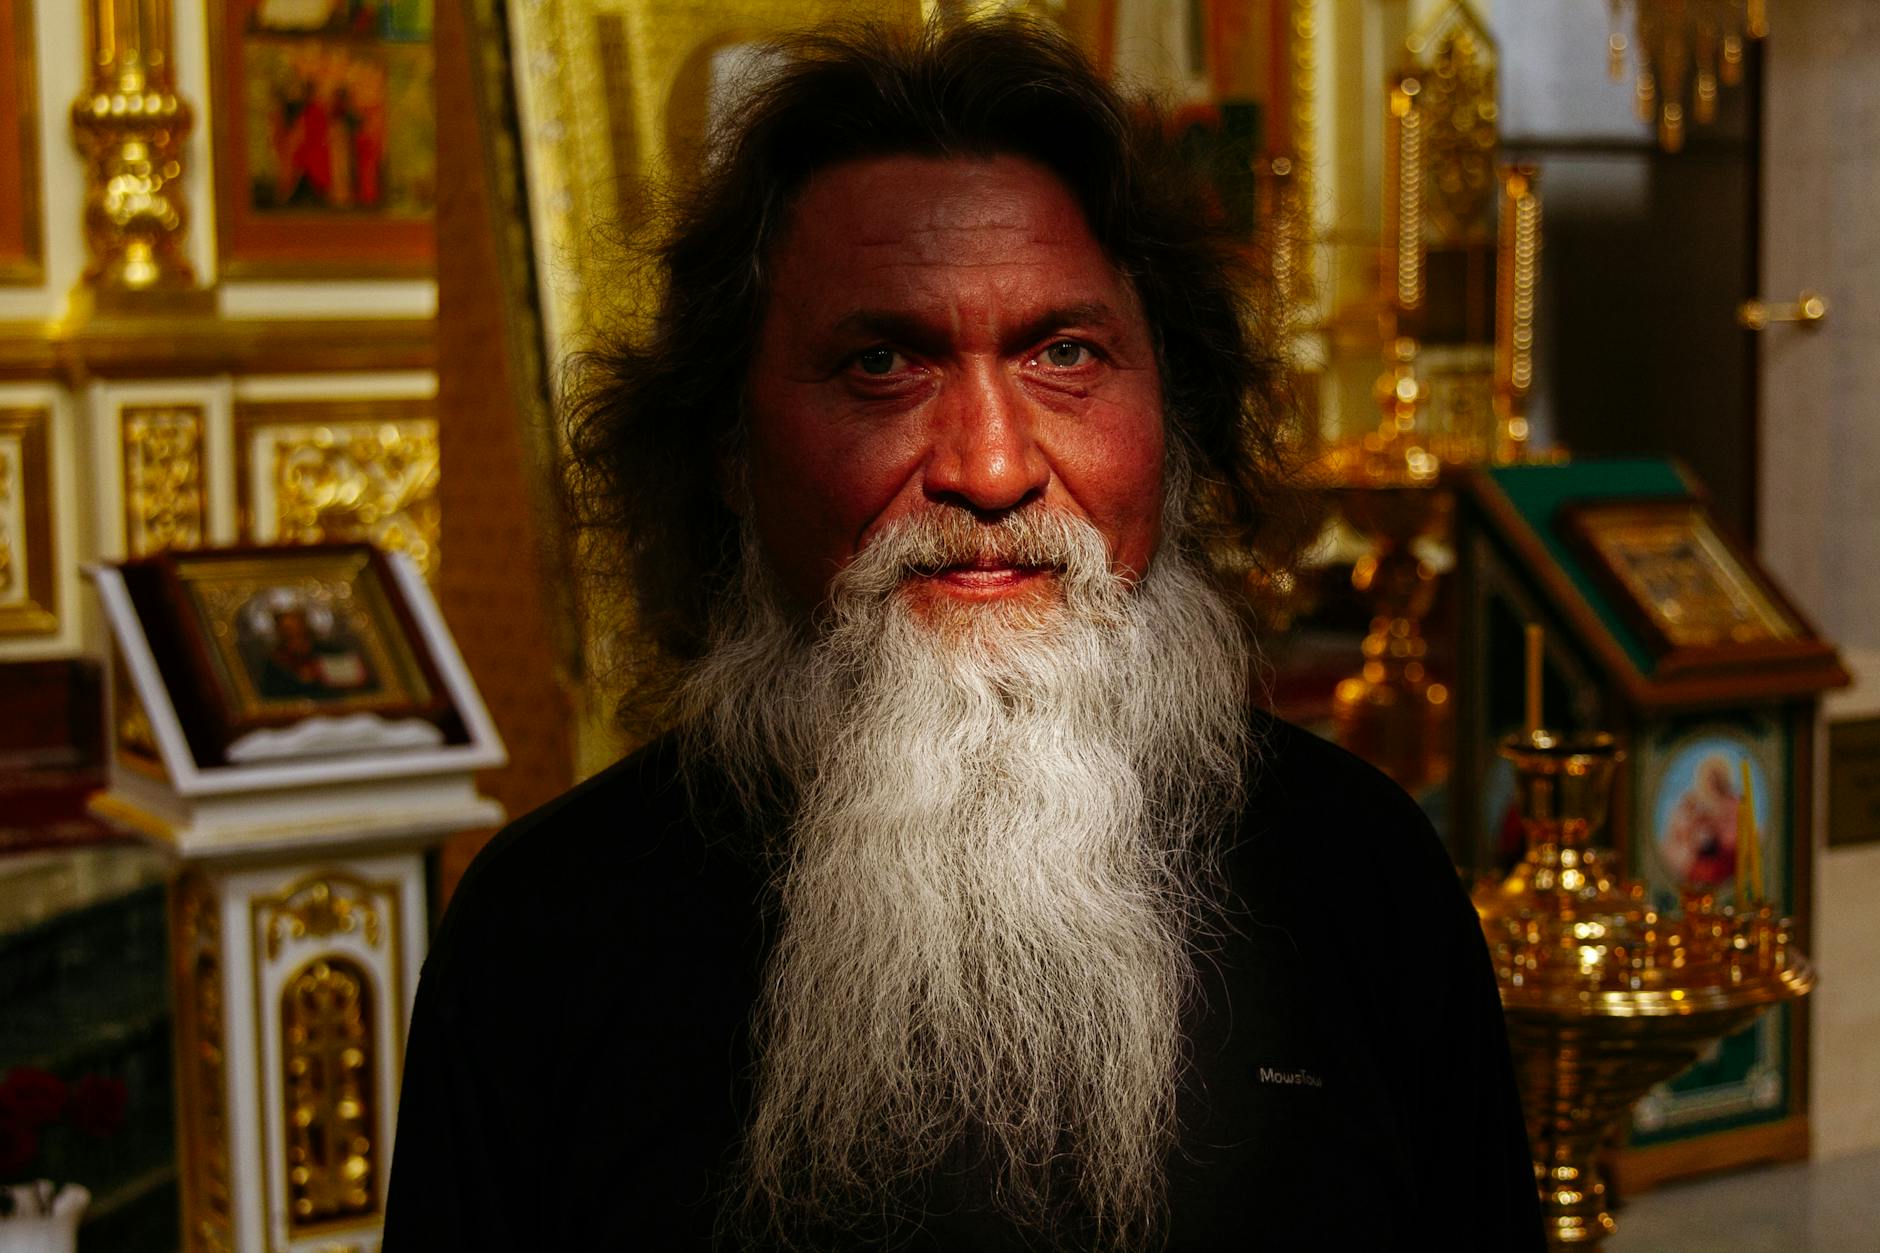 Peaceful senior Orthodox priest with gray beard in cassock standing in church near golden icons and frescoes and looking at camera